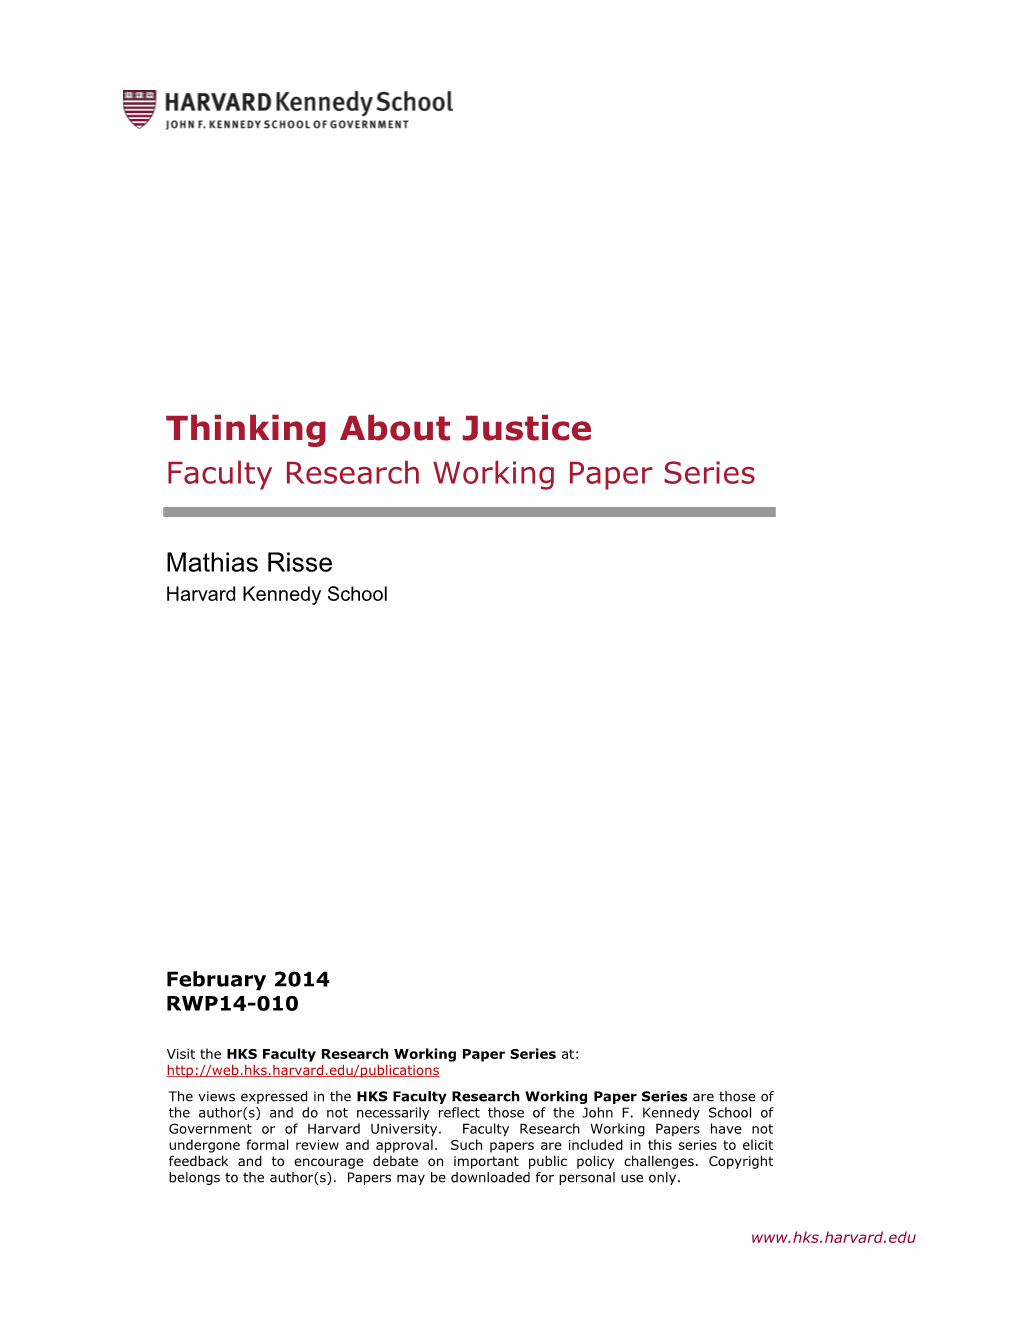 Thinking About Justice Faculty Research Working Paper Series